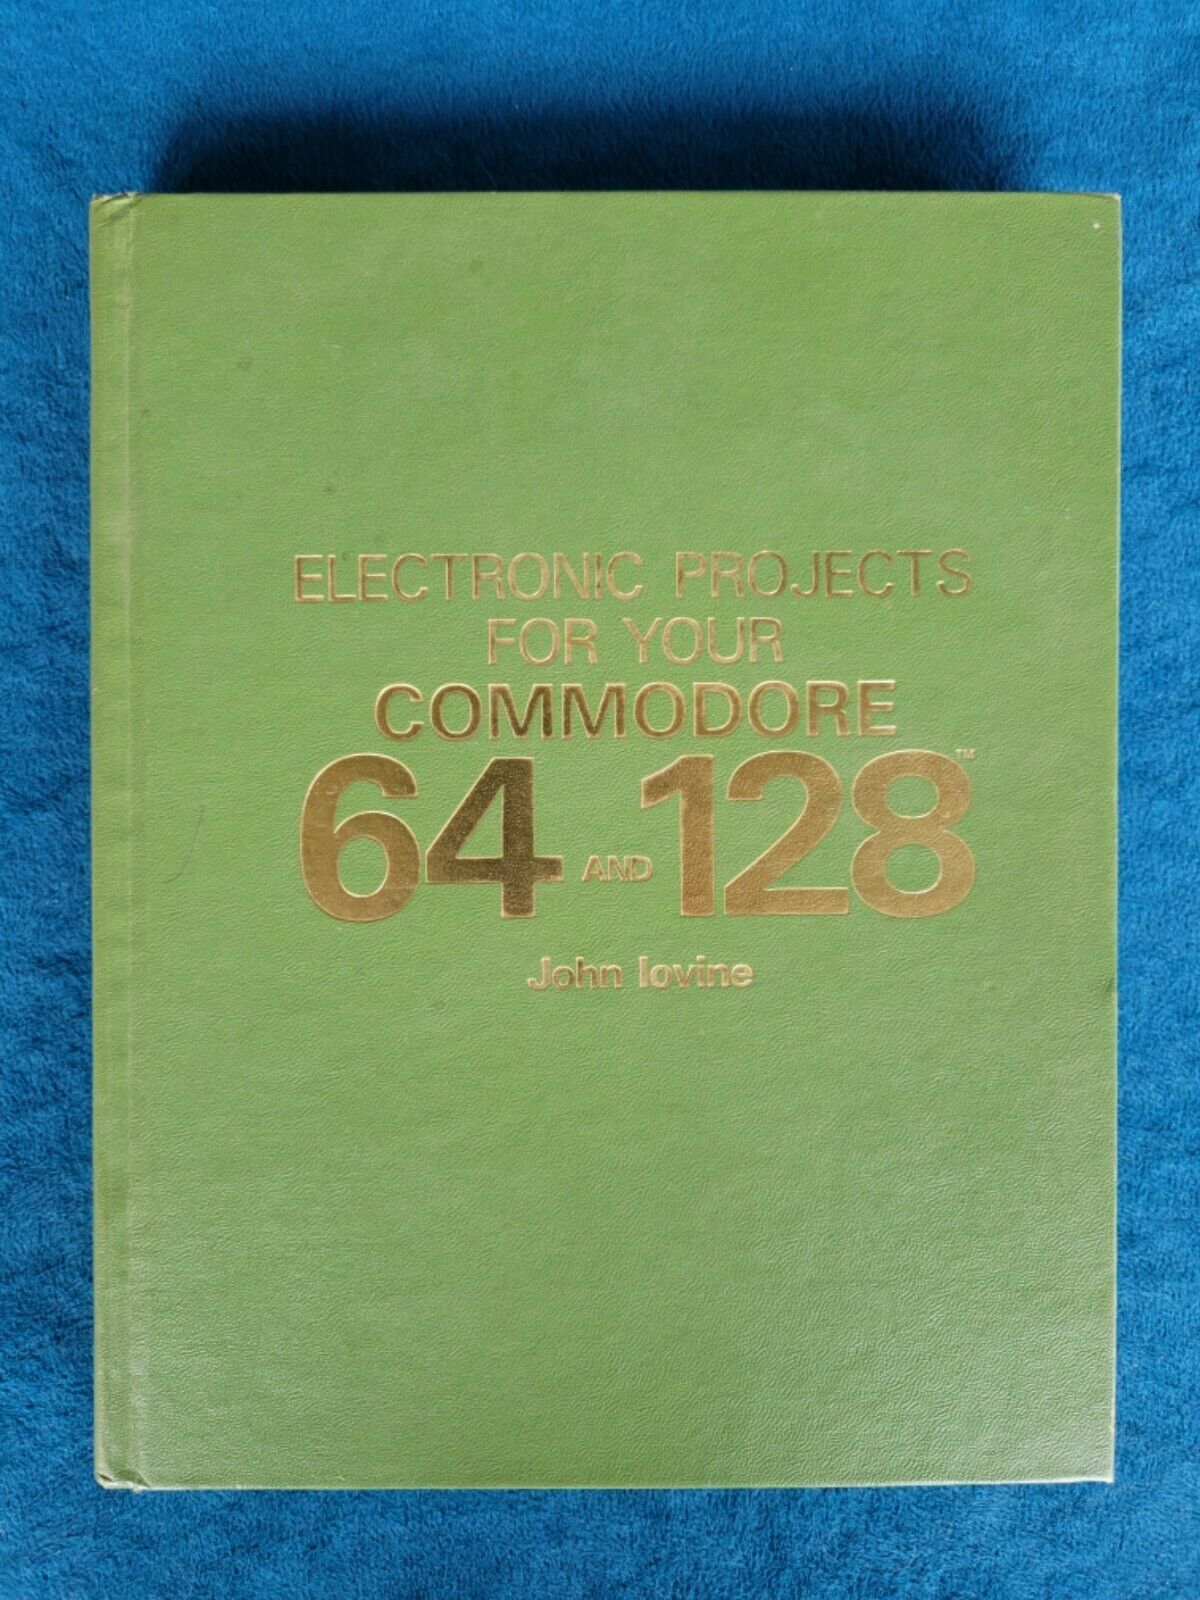 ELECTRONIC PROJECTS FOR YOUR COMMODORE 64 AND 128 ; PUBLISHED 1989; JOHN IOVINE